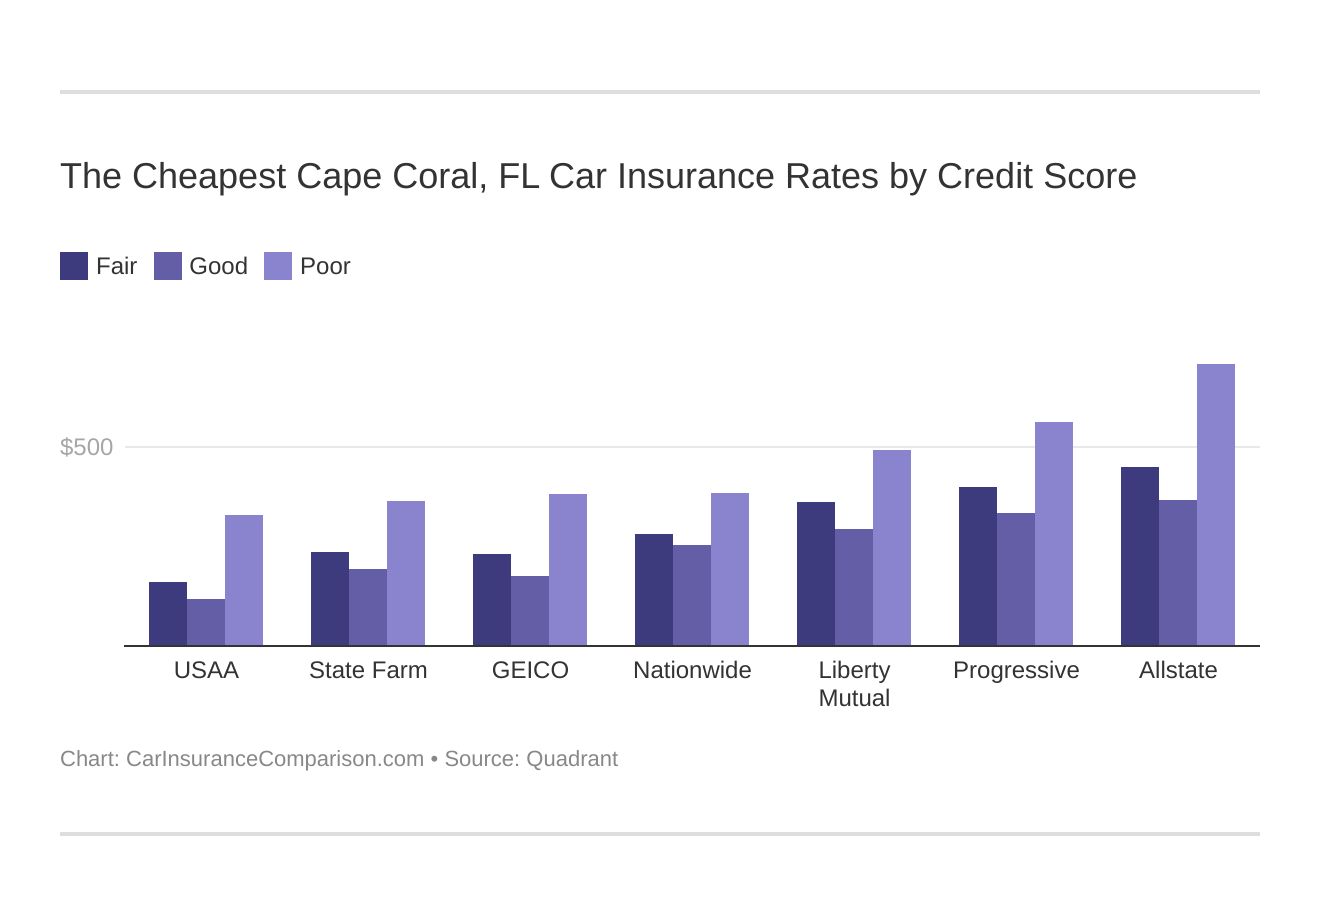 The Cheapest Cape Coral, FL Car Insurance Rates by Credit Score